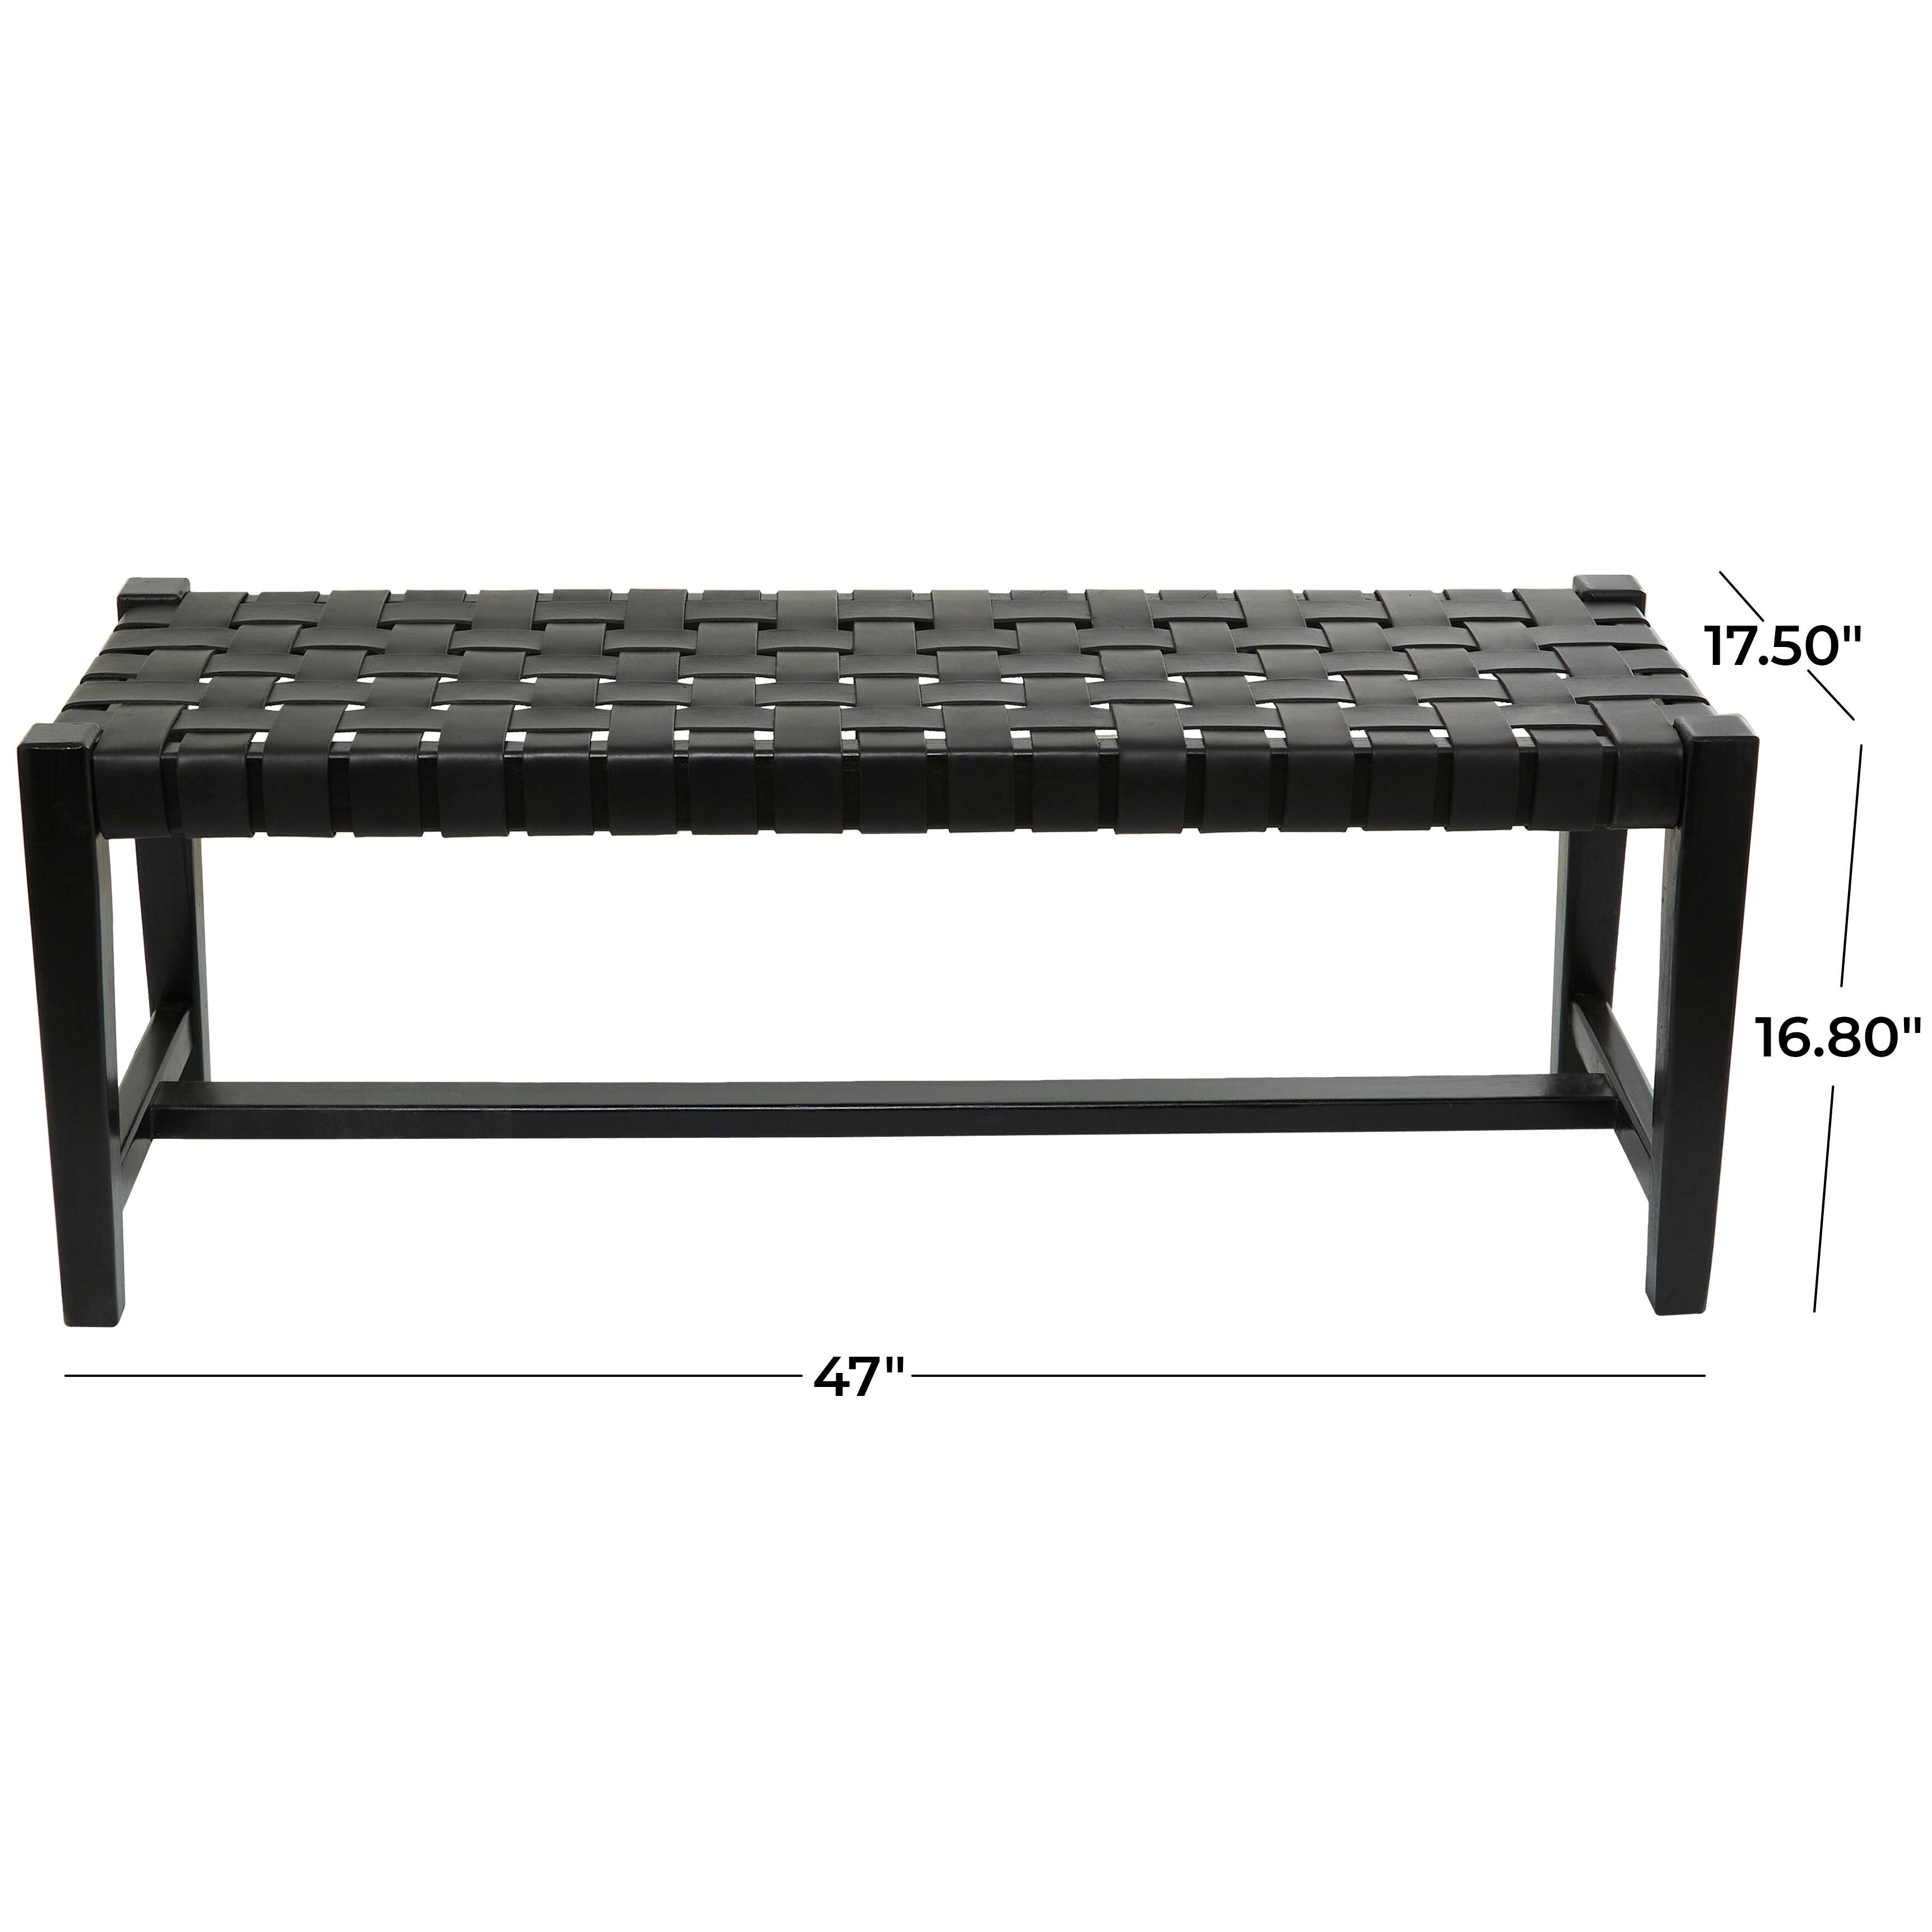 Black or Brown Leather Handmade Woven Seat Bench - 47 x 18 x 17 - Black